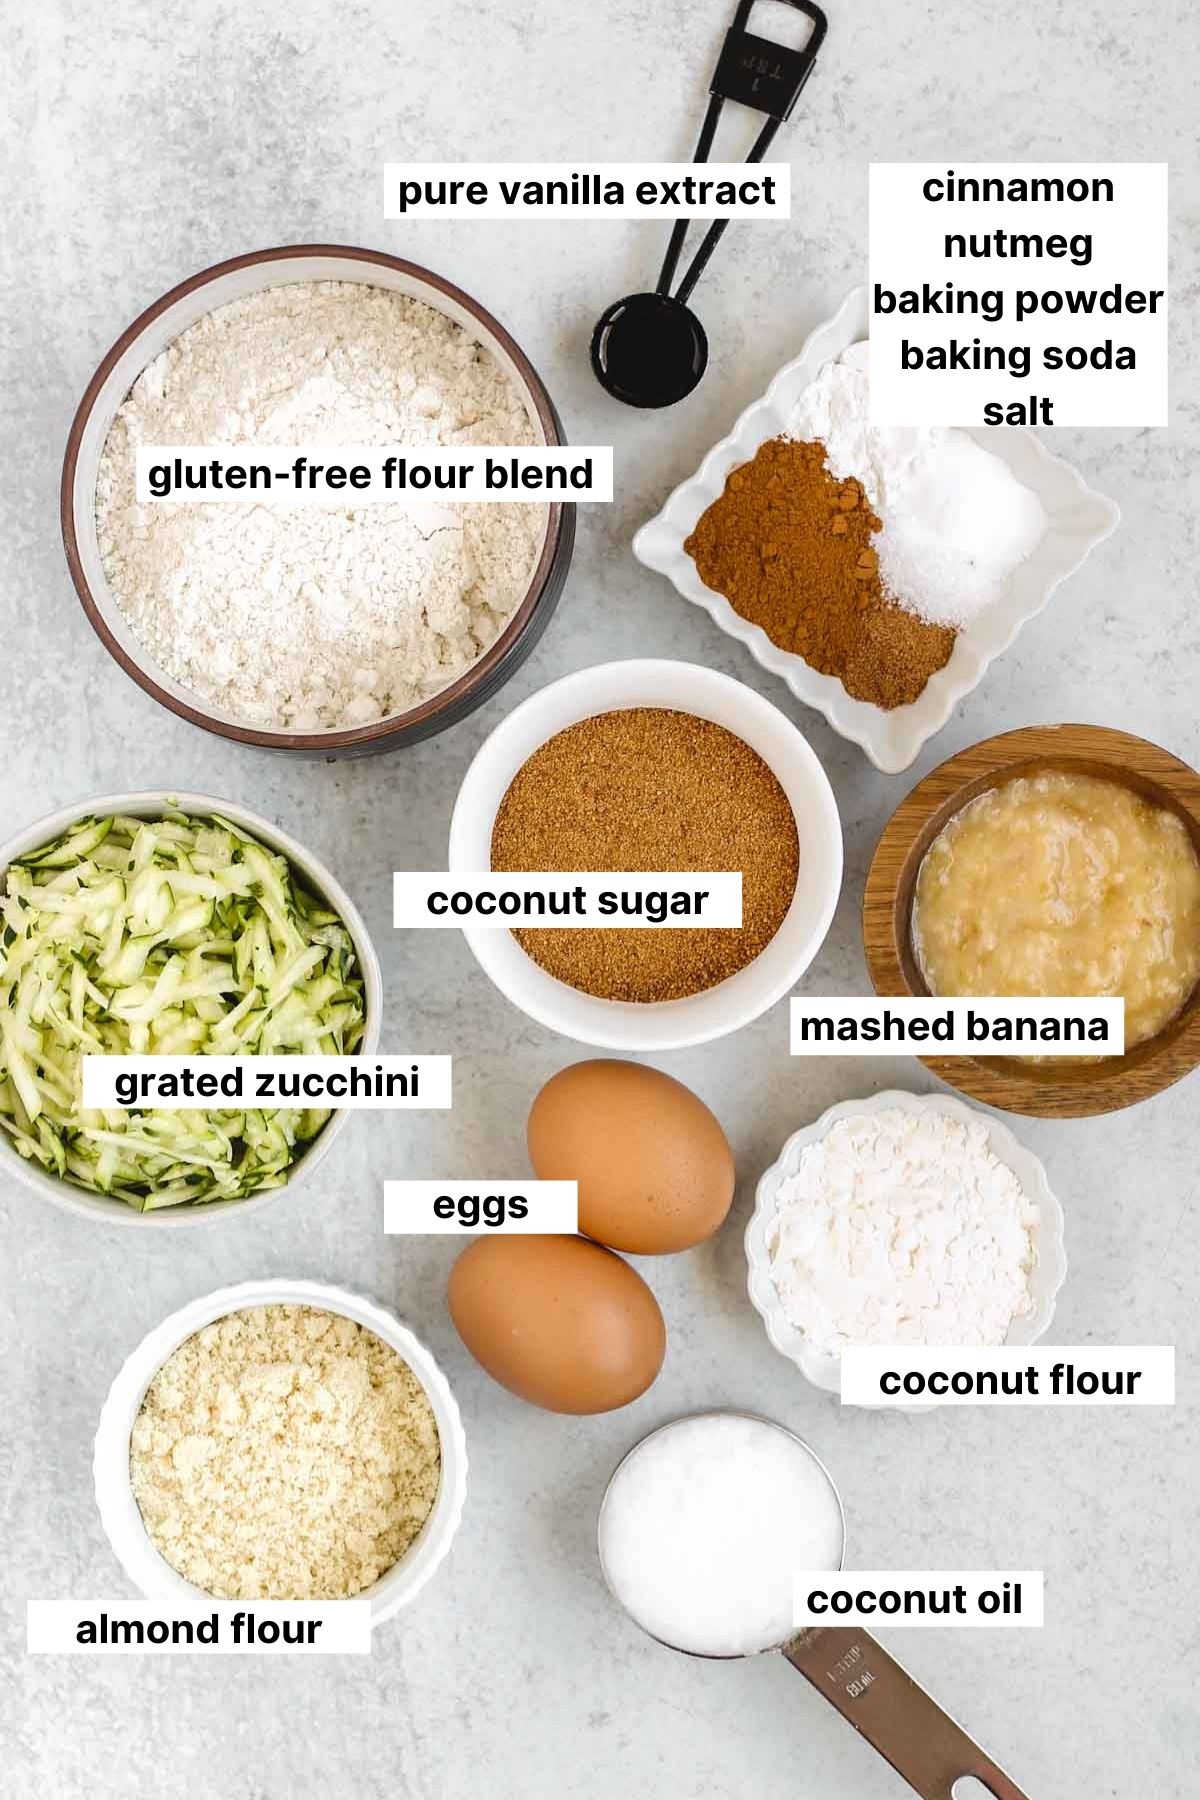 labeled ingredients for gluten-free zucchini bread